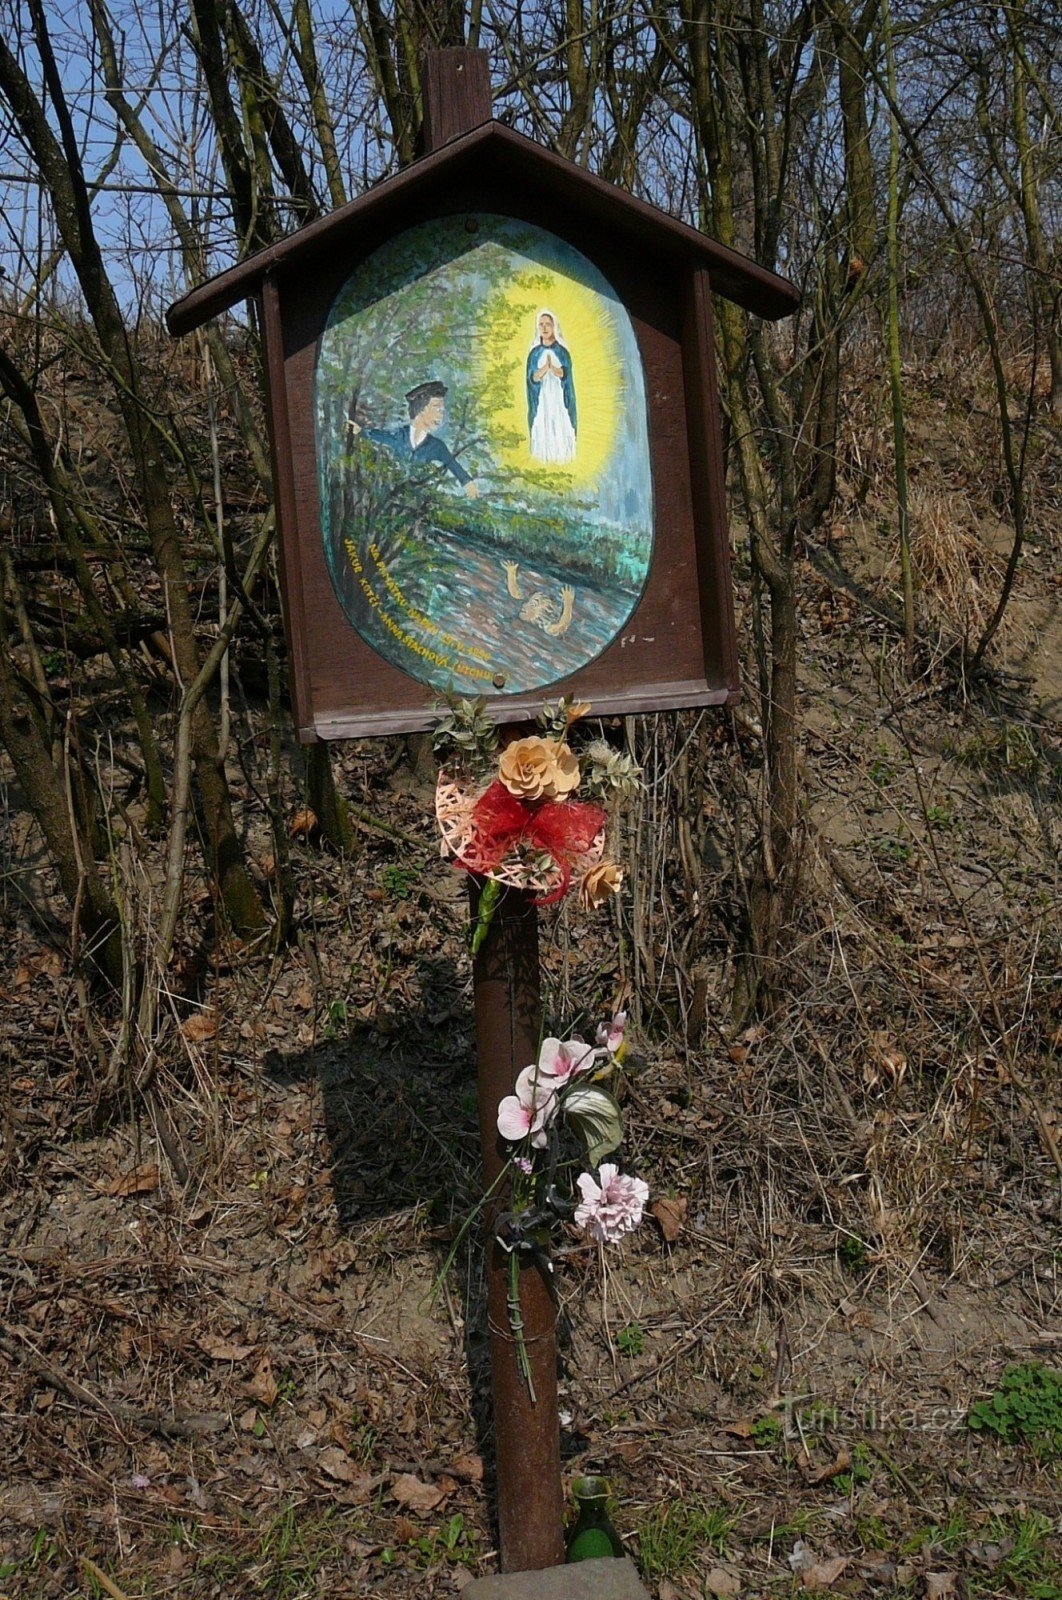 A holy image by the wayside - a memory of drowning children